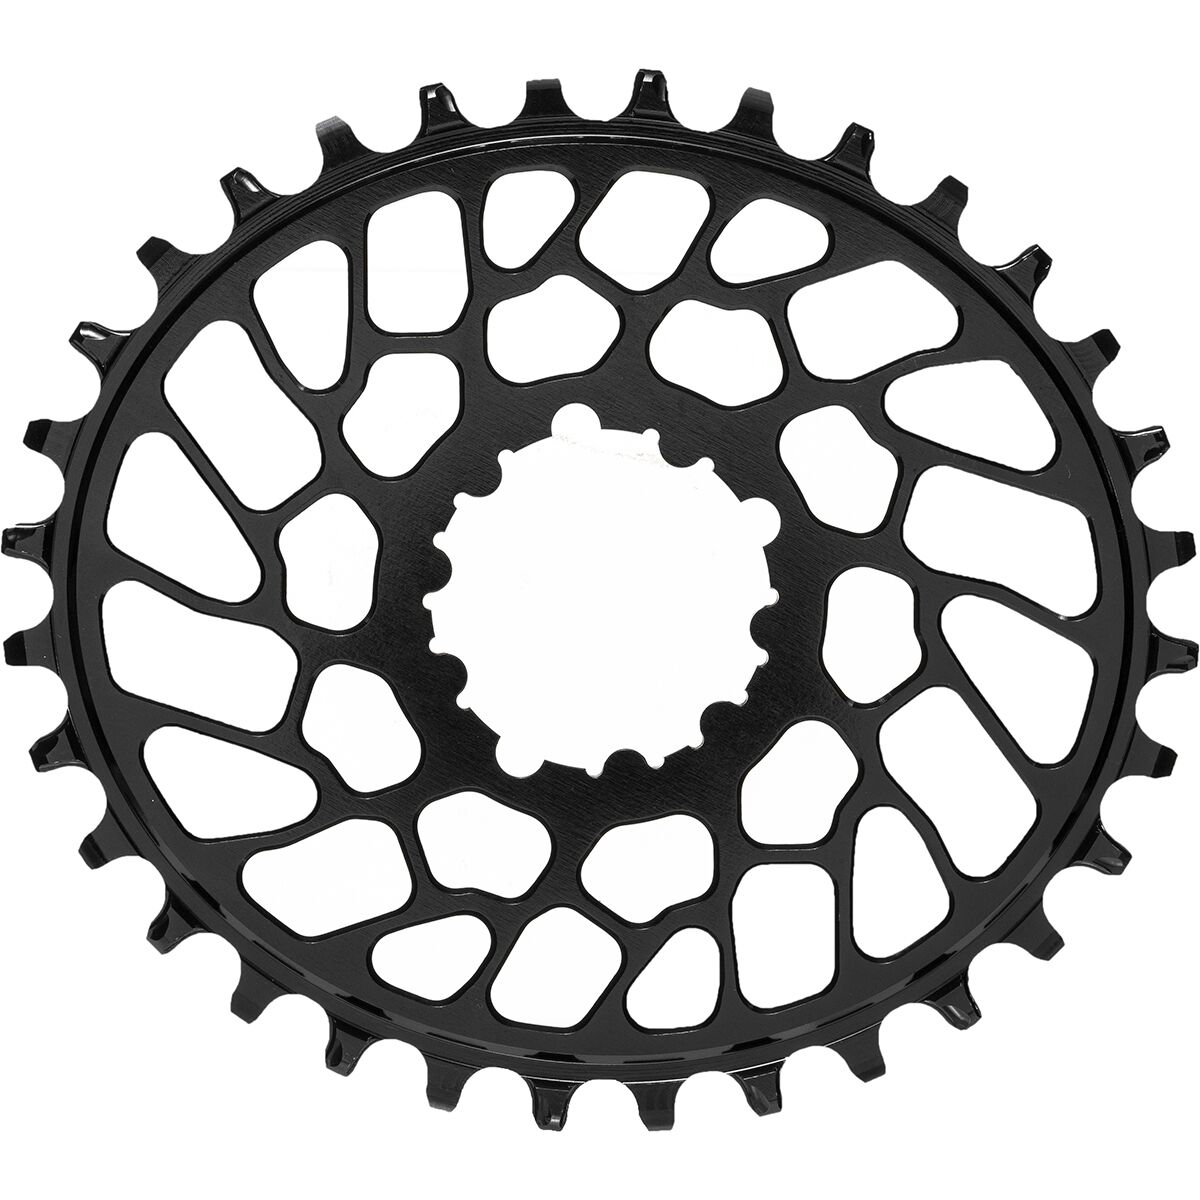 Absolute Black SRAM Oval Direct Mount Traction Chainring